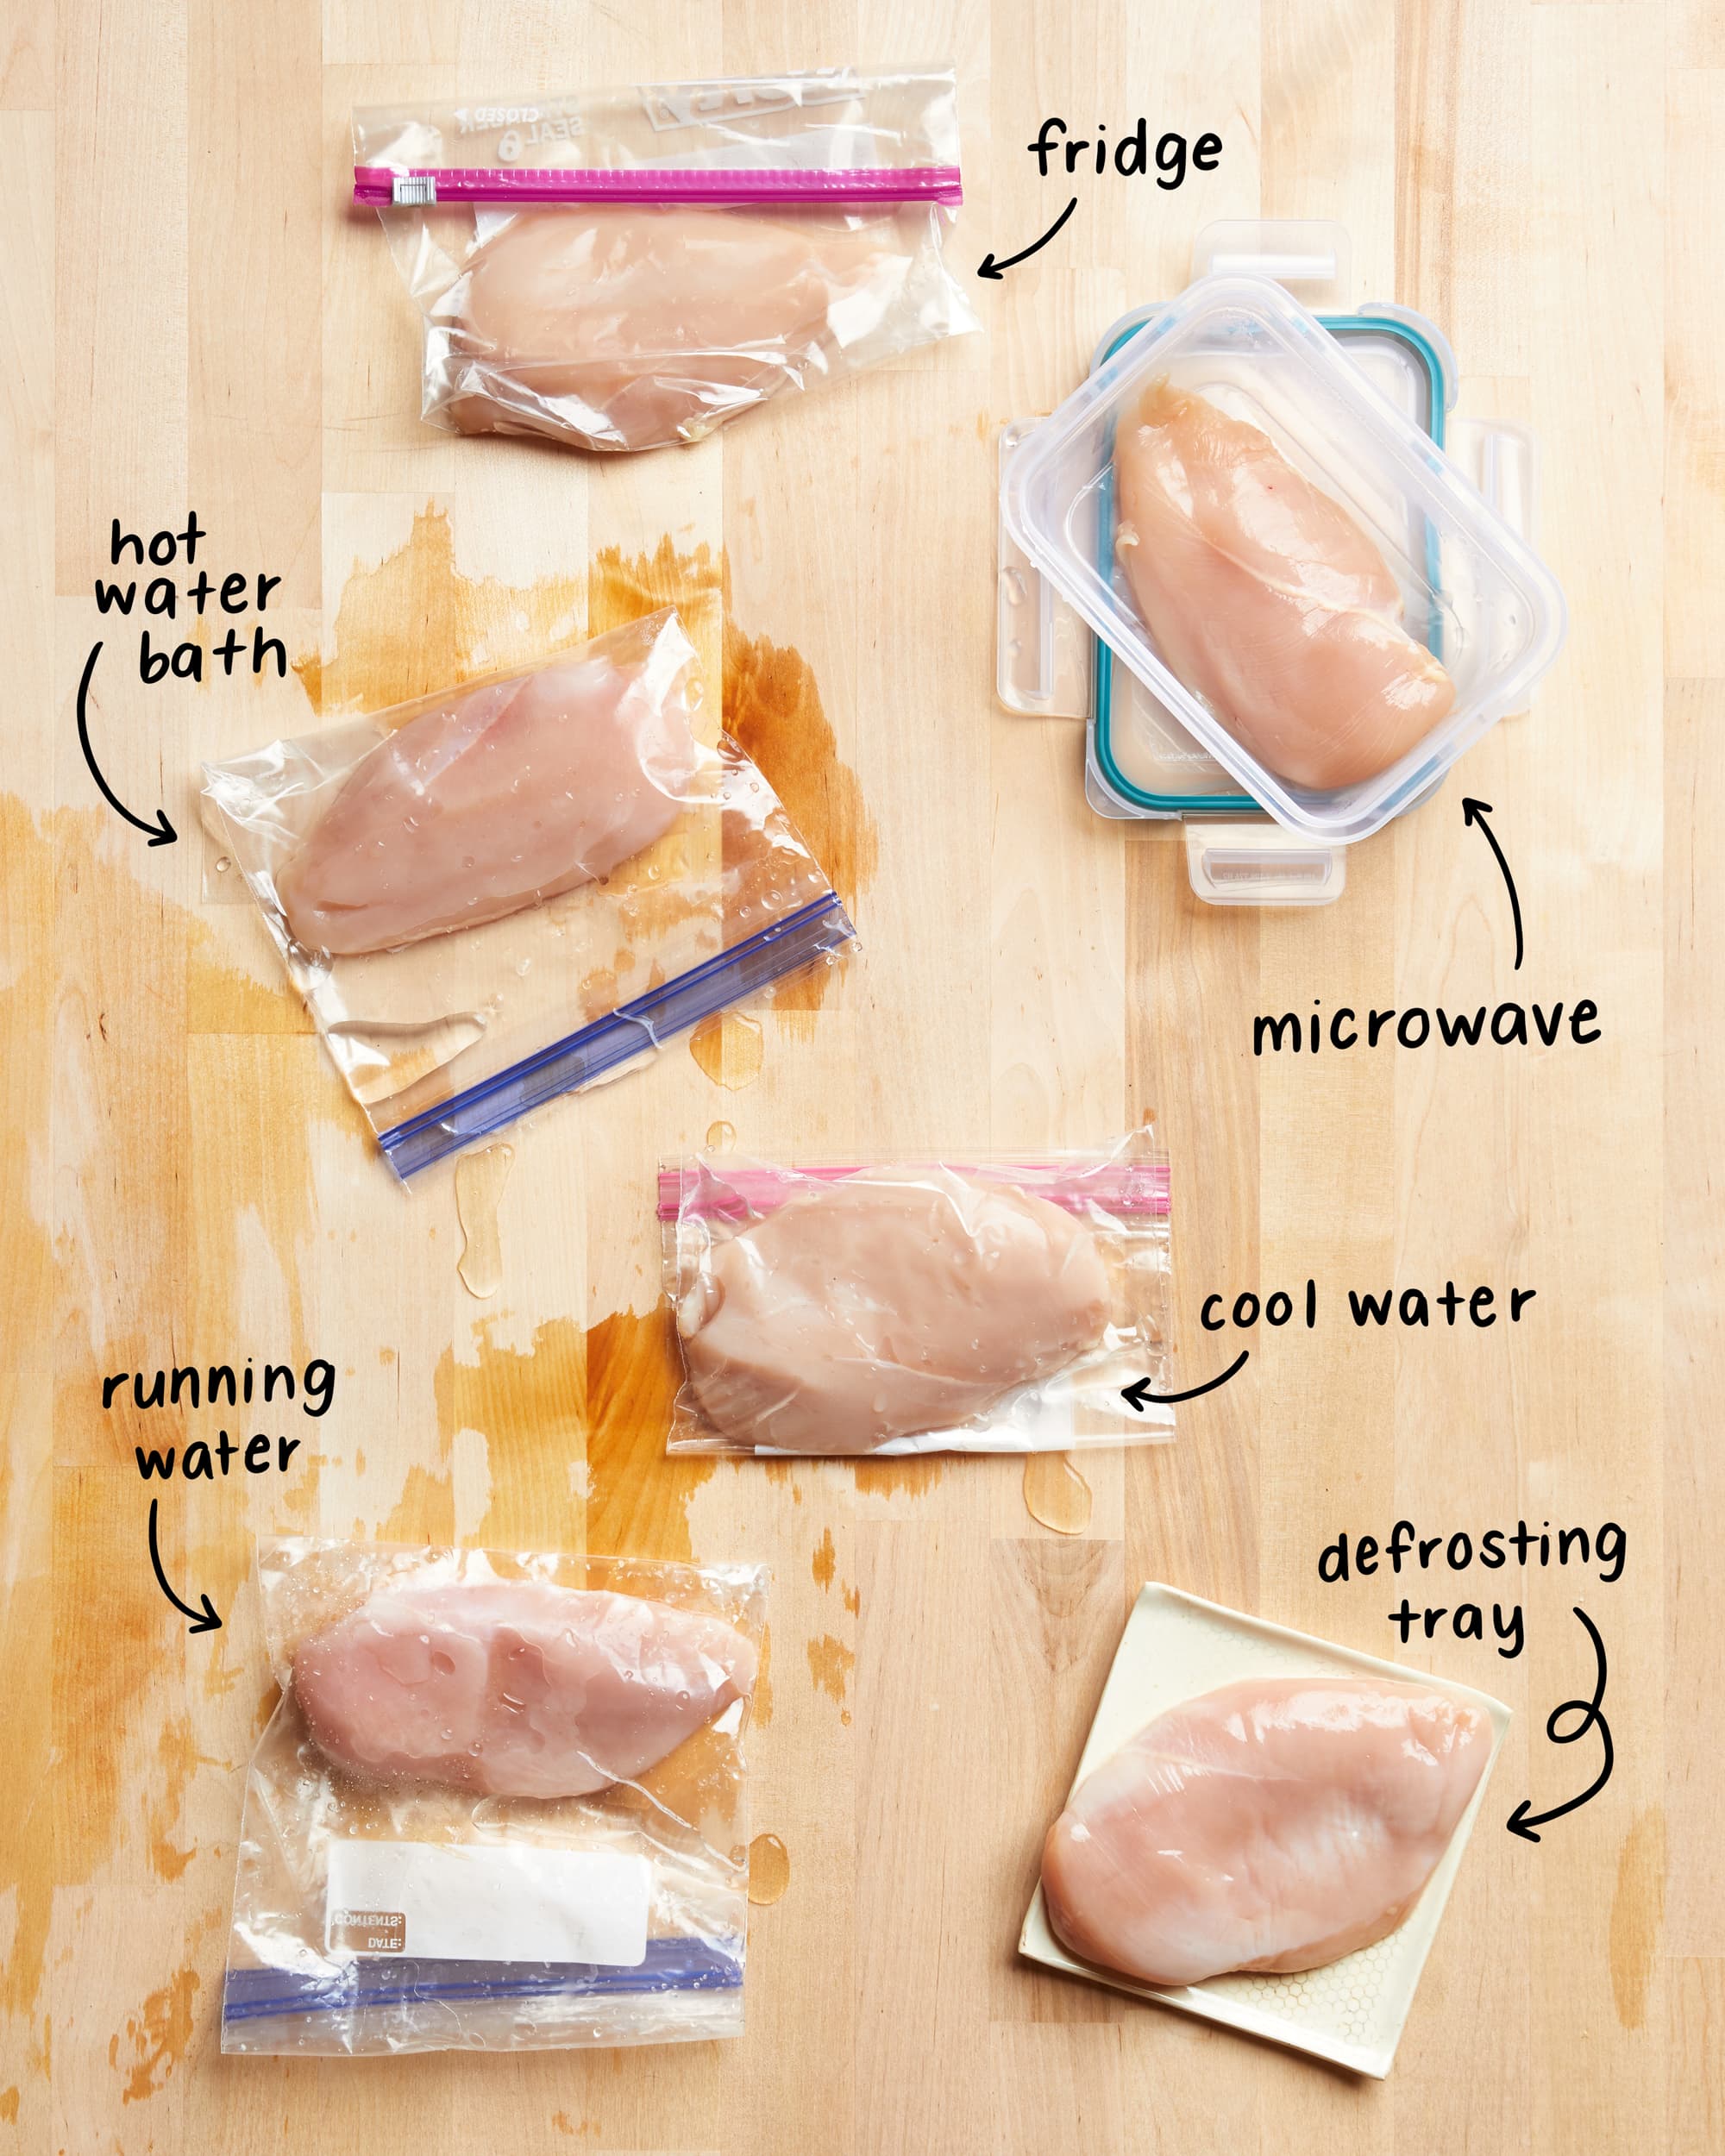 How to Safely Defrost Chicken (6 Methods)